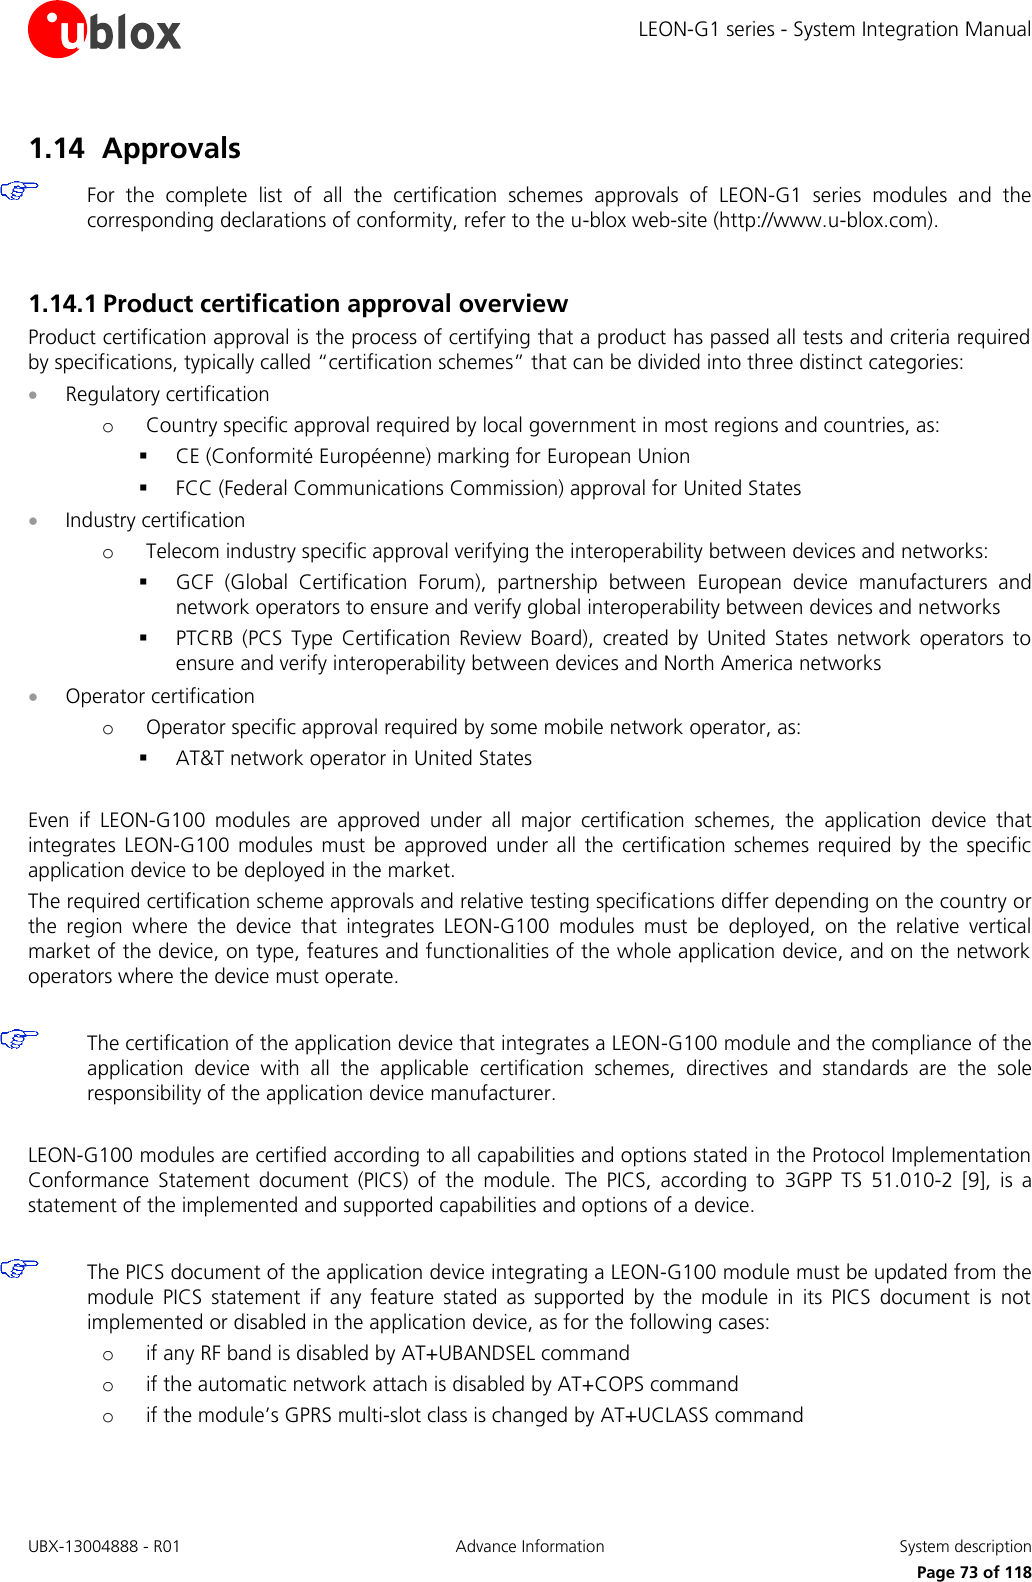 LEON-G1 series - System Integration Manual UBX-13004888 - R01  Advance Information  System description      Page 73 of 118 1.14 Approvals  For  the  complete  list  of  all  the  certification  schemes  approvals  of  LEON-G1  series  modules  and  the corresponding declarations of conformity, refer to the u-blox web-site (http://www.u-blox.com).  1.14.1 Product certification approval overview Product certification approval is the process of certifying that a product has passed all tests and criteria required by specifications, typically called “certification schemes” that can be divided into three distinct categories:  Regulatory certification o Country specific approval required by local government in most regions and countries, as:  CE (Conformité Européenne) marking for European Union  FCC (Federal Communications Commission) approval for United States  Industry certification o Telecom industry specific approval verifying the interoperability between devices and networks:  GCF  (Global  Certification  Forum),  partnership  between  European  device  manufacturers  and network operators to ensure and verify global interoperability between devices and networks  PTCRB  (PCS  Type  Certification  Review  Board),  created  by  United  States  network  operators  to ensure and verify interoperability between devices and North America networks  Operator certification o Operator specific approval required by some mobile network operator, as:  AT&amp;T network operator in United States  Even  if  LEON-G100  modules  are  approved  under  all  major  certification  schemes,  the  application  device  that integrates  LEON-G100  modules  must  be  approved  under  all the  certification schemes required  by  the  specific application device to be deployed in the market. The required certification scheme approvals and relative testing specifications differ depending on the country or the  region  where  the  device  that  integrates  LEON-G100  modules  must  be  deployed,  on  the  relative  vertical market of the device, on type, features and functionalities of the whole application device, and on the network operators where the device must operate.   The certification of the application device that integrates a LEON-G100 module and the compliance of the application  device  with  all  the  applicable  certification  schemes,  directives  and  standards  are  the  sole responsibility of the application device manufacturer.  LEON-G100 modules are certified according to all capabilities and options stated in the Protocol Implementation Conformance  Statement  document  (PICS)  of  the  module.  The  PICS,  according  to  3GPP  TS  51.010-2  [9],  is  a statement of the implemented and supported capabilities and options of a device.   The PICS document of the application device integrating a LEON-G100 module must be updated from the module  PICS  statement  if  any  feature  stated  as  supported  by  the  module  in  its  PICS  document  is  not implemented or disabled in the application device, as for the following cases: o if any RF band is disabled by AT+UBANDSEL command o if the automatic network attach is disabled by AT+COPS command o if the module’s GPRS multi-slot class is changed by AT+UCLASS command  